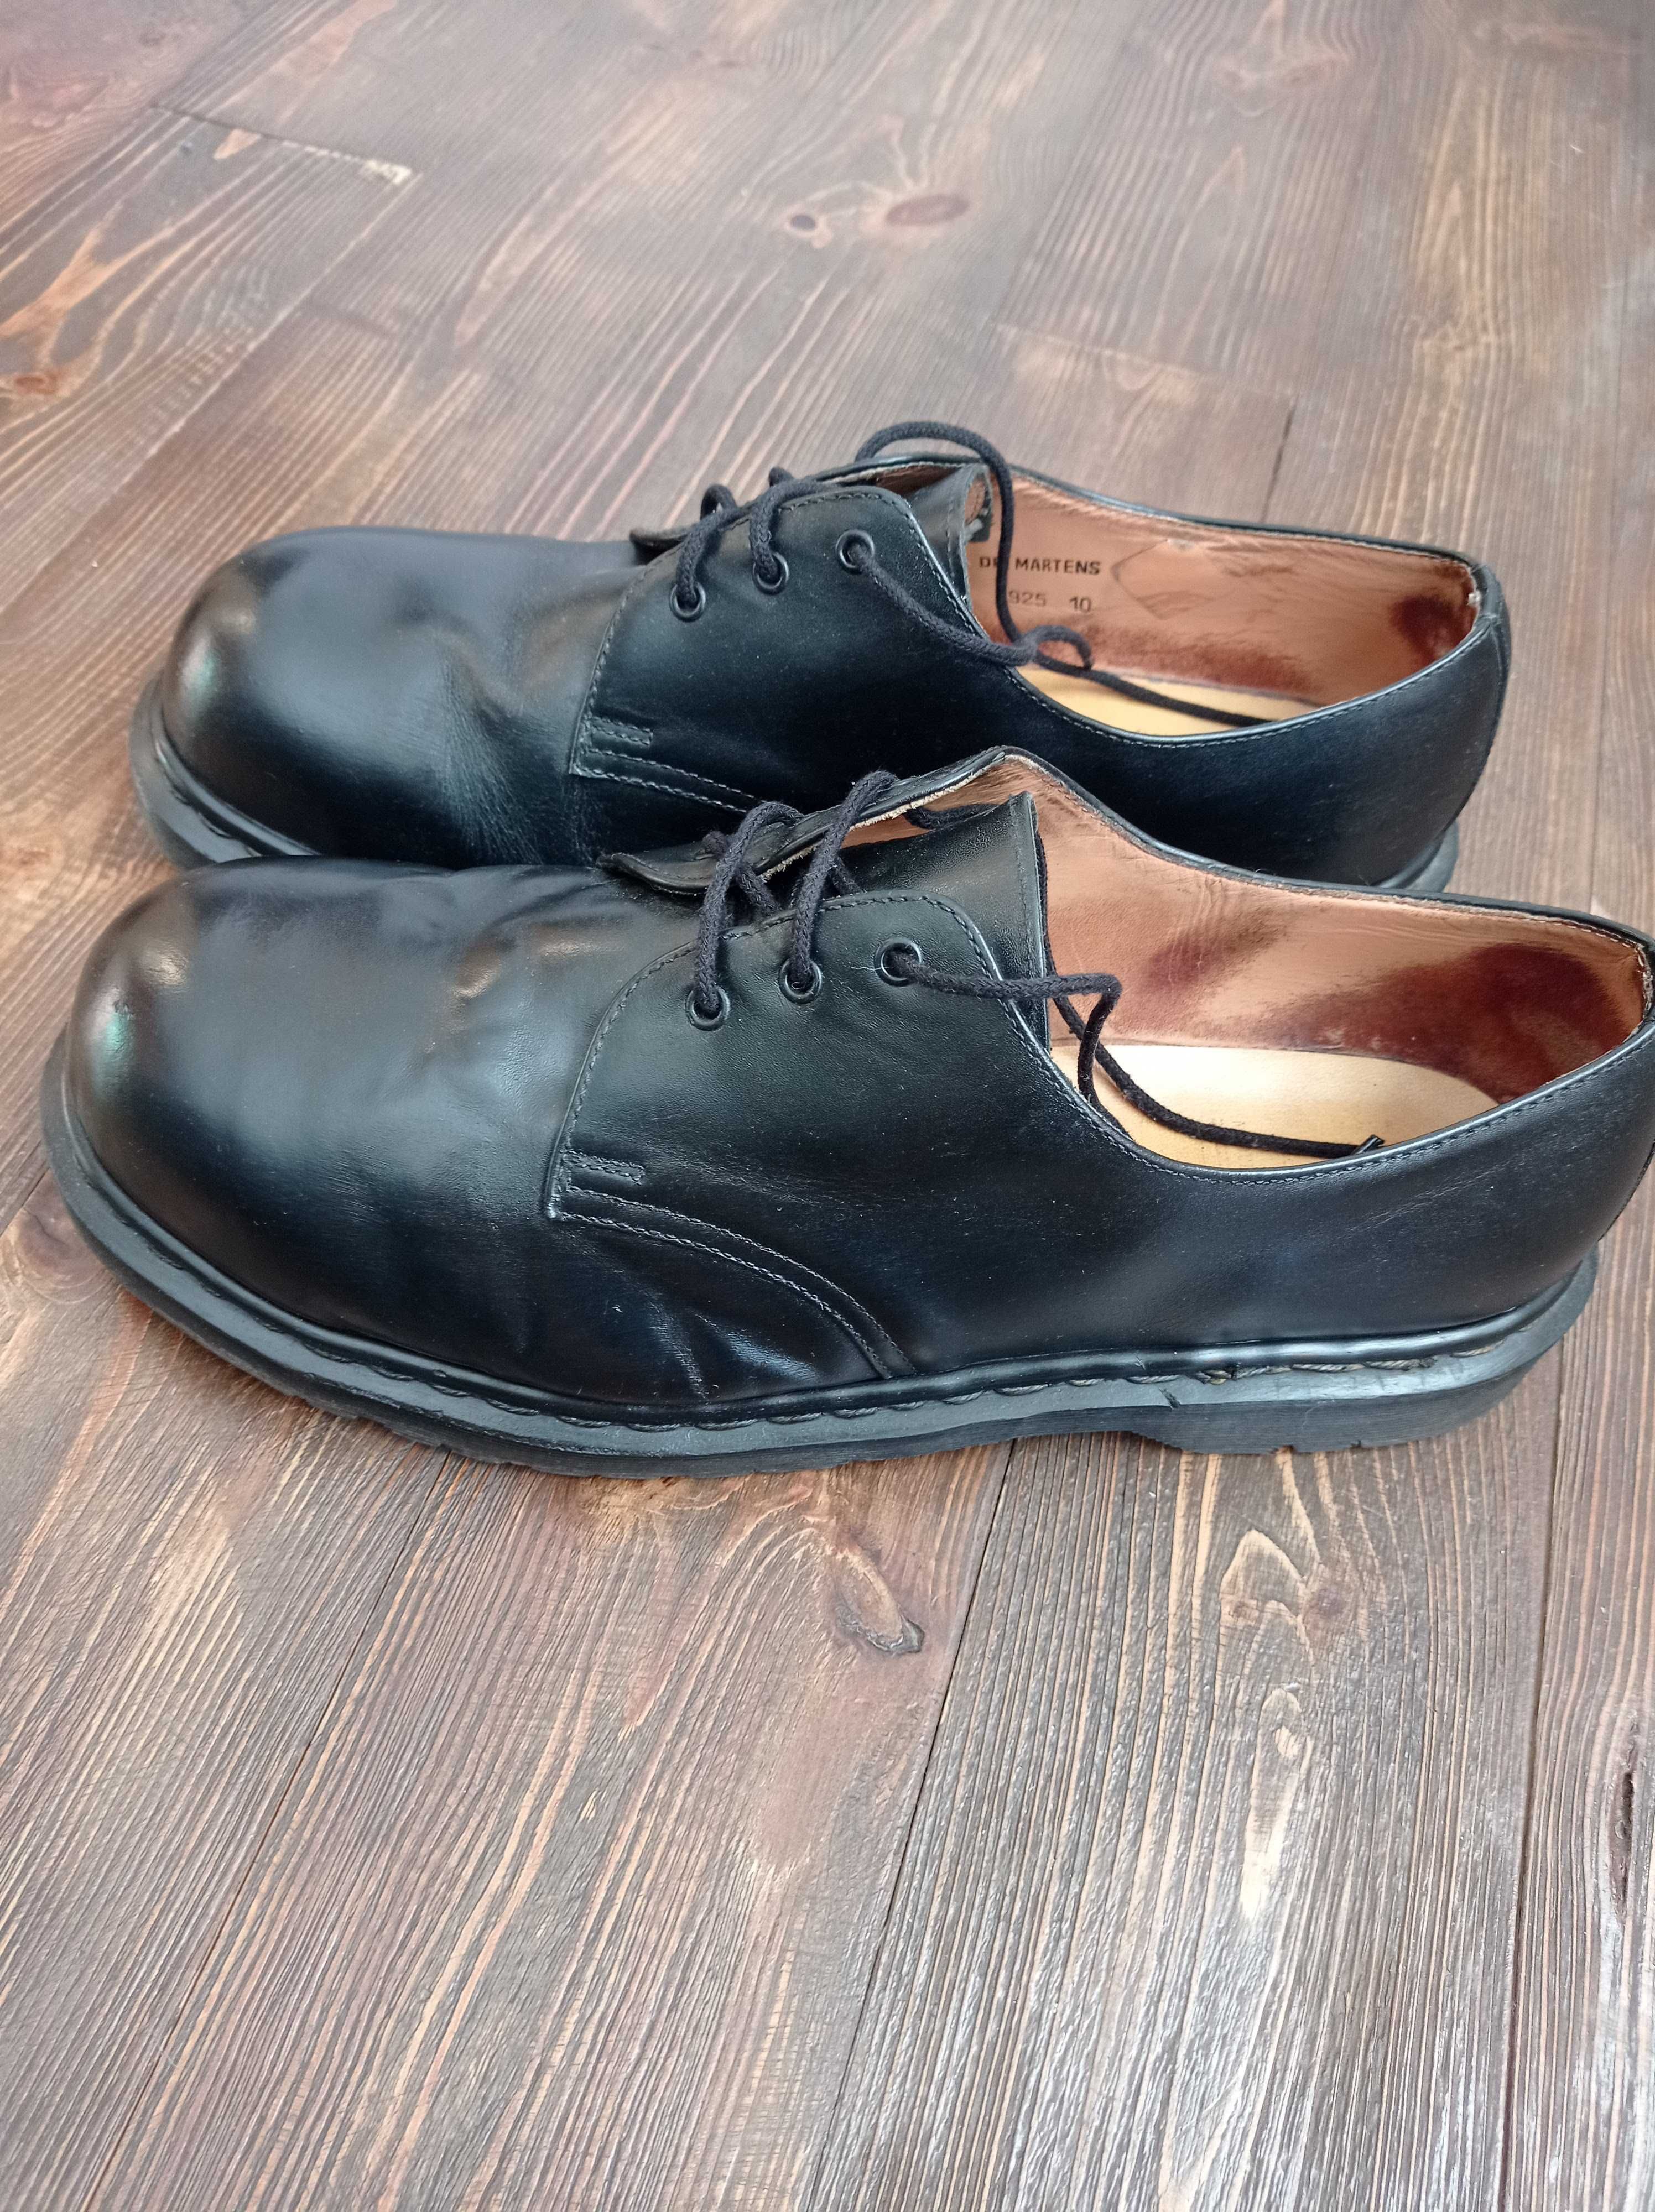 Dr. Martens Glany 1925 , rozmiar 45 unikat Made in England